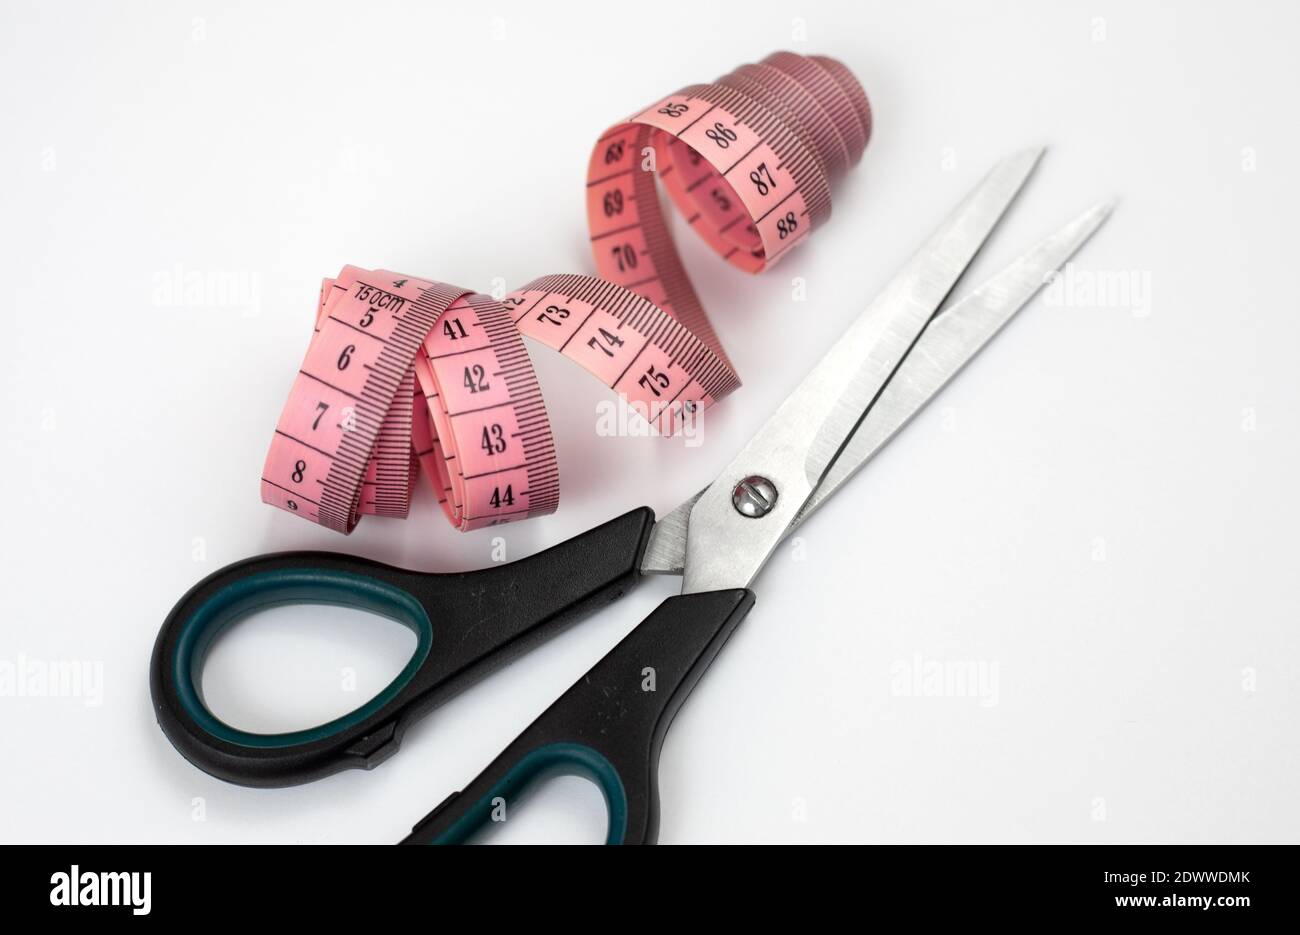 Pink Tape Measure on White Background Stock Photo - Image of dieting, inch:  48560744